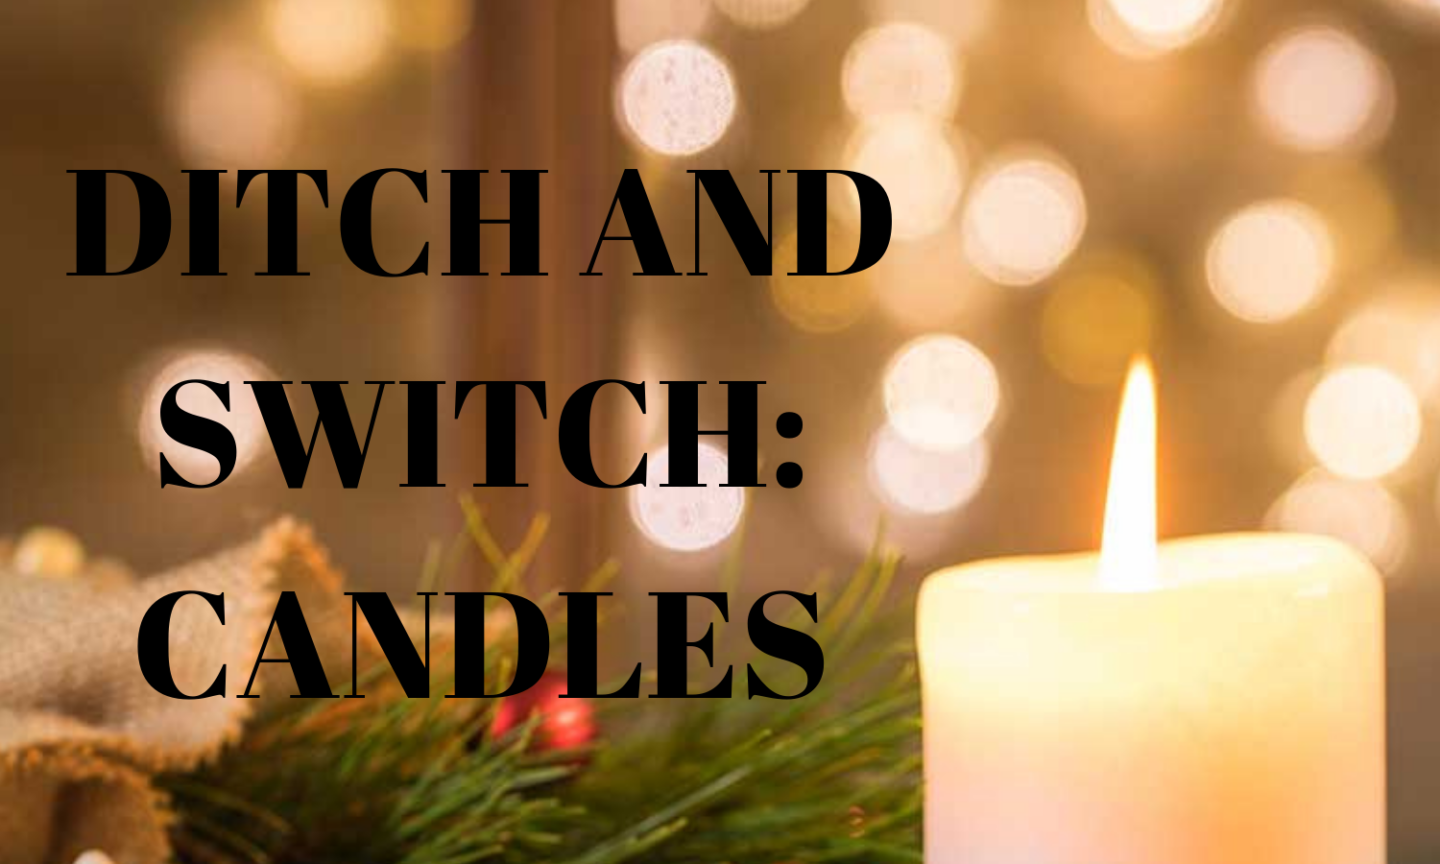 Ditch and Switch: Candles